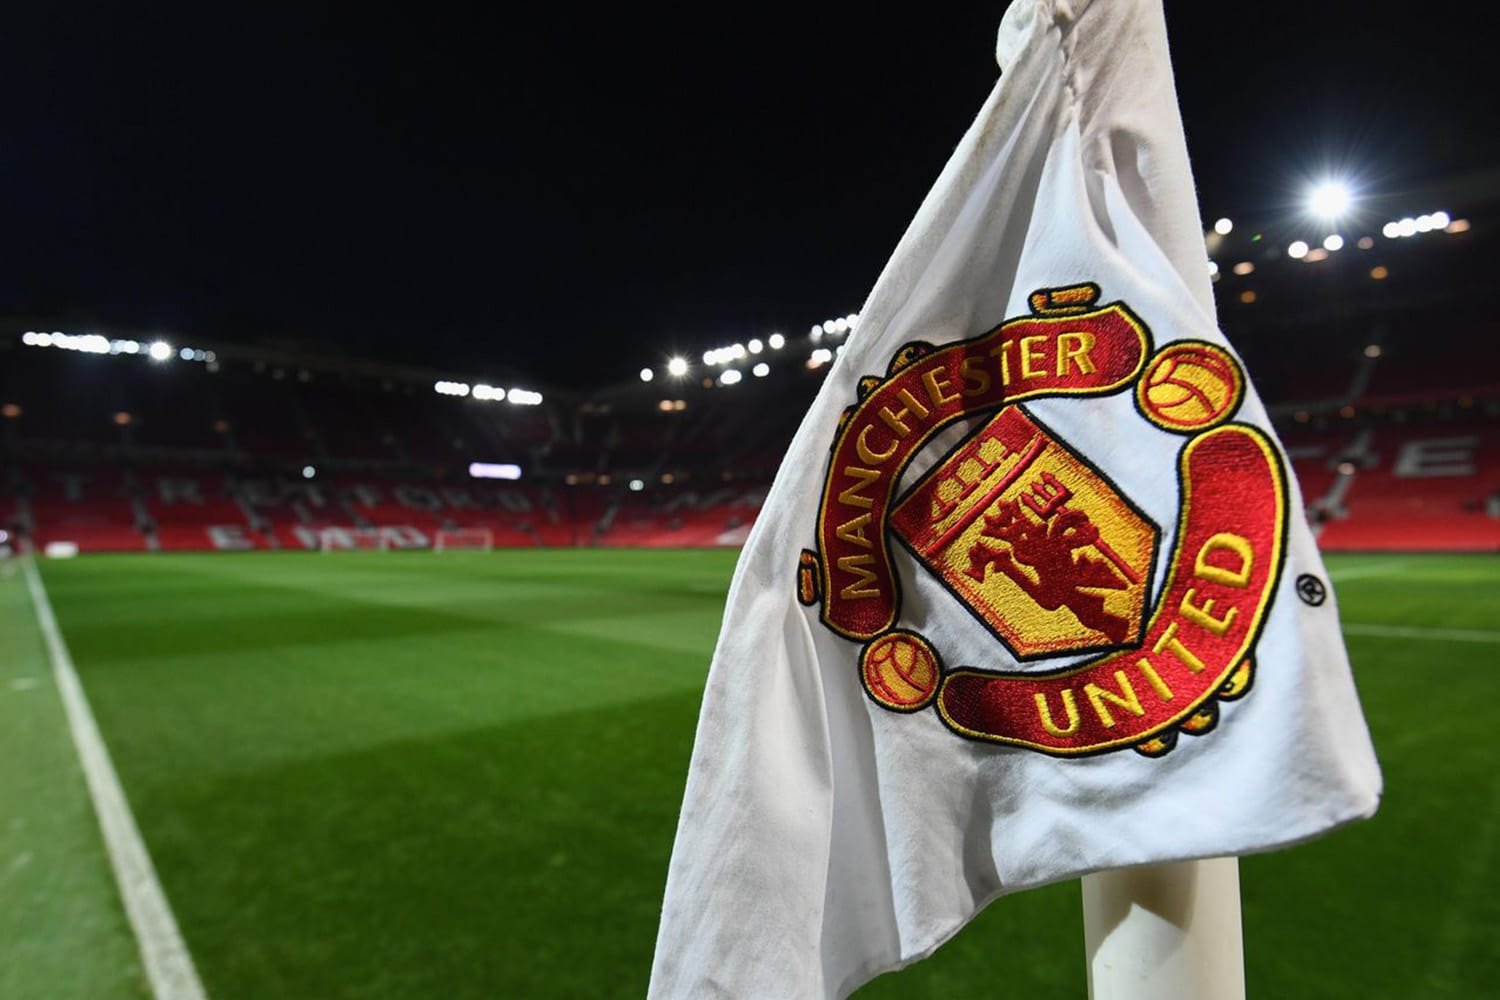 A view of a Manchester United corner flag during a night match.